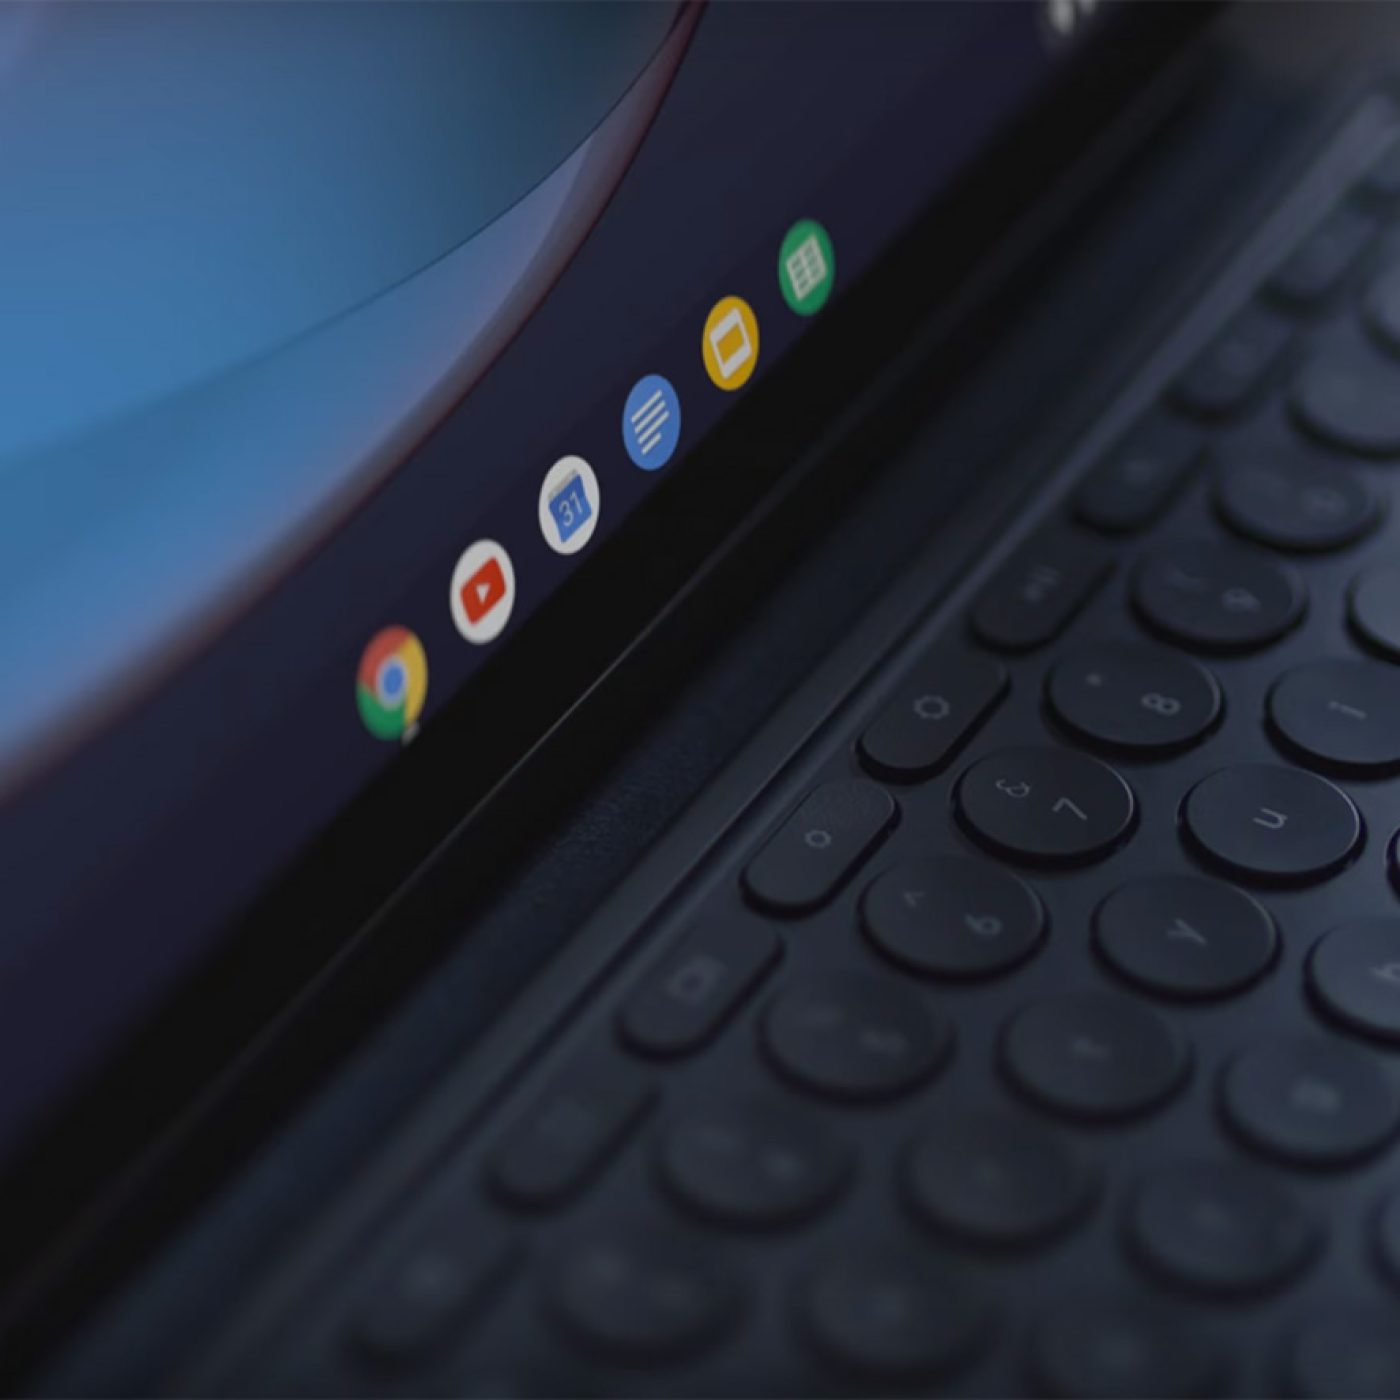 Google Pixel Slate review: An Android tablet with Chromebook